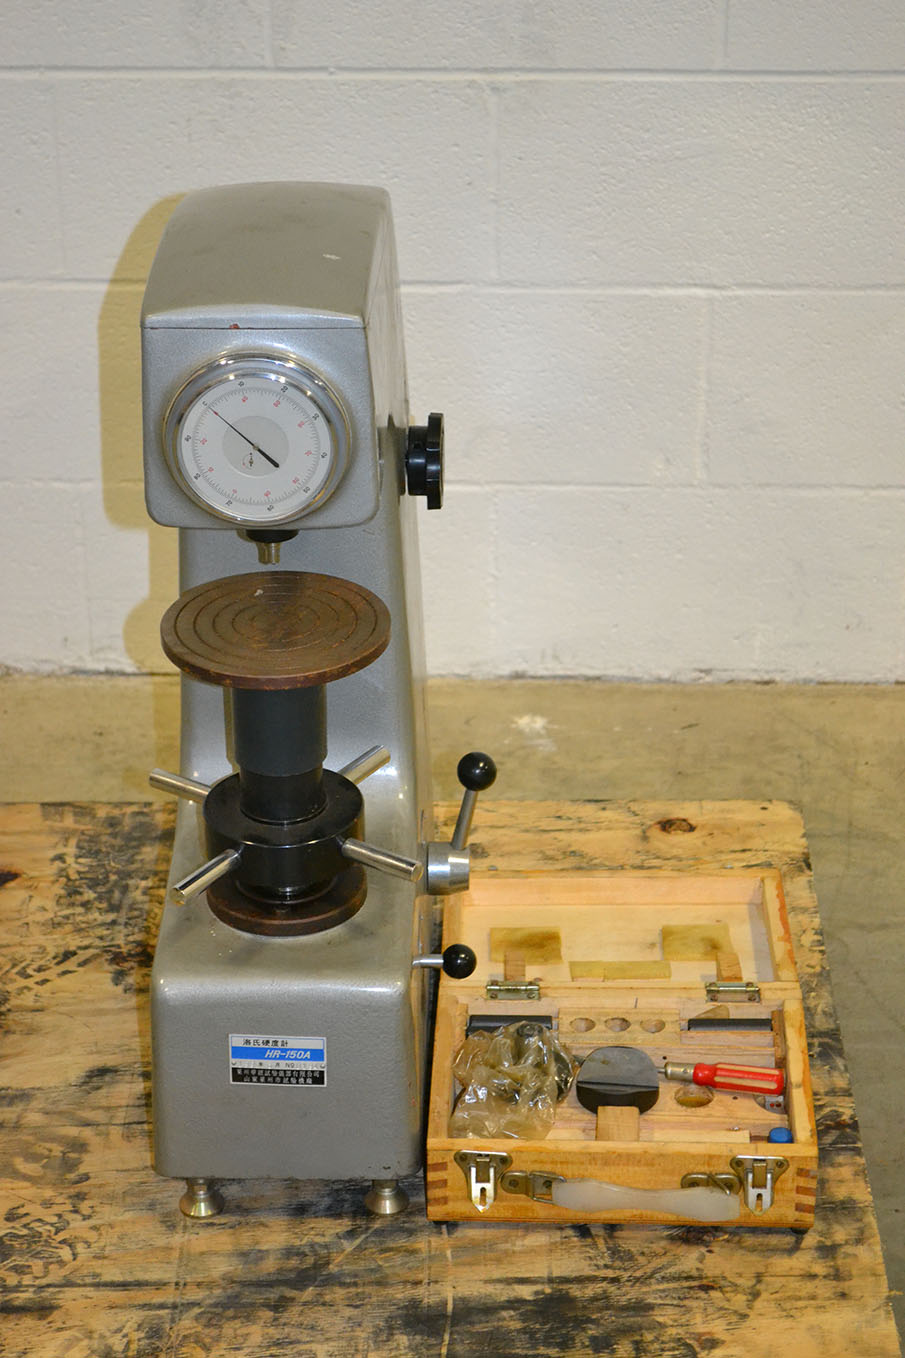 Rockwell HR-150A Hardness Tester, Bench Top